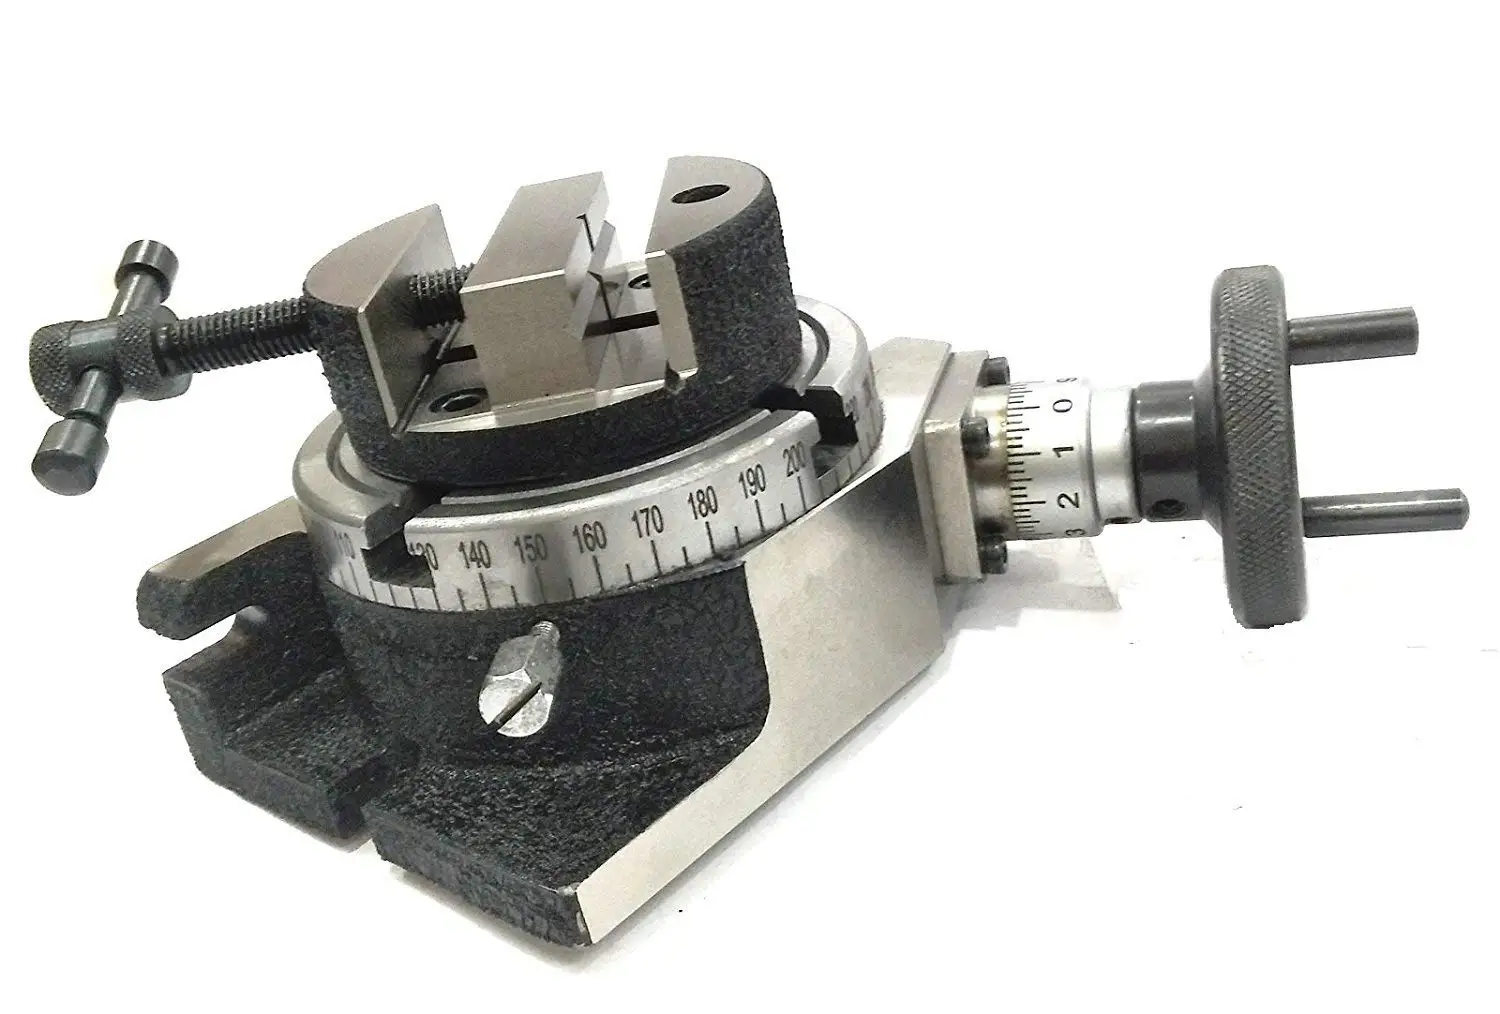 WITH 70 MM 4 JAWS INDEPENDENT PRECISION QUALITY 4// 100 MM TILTING MILLING INDEXING ROTARY TABLE WITH SUITABLE M6 CLAMP KIT /& ROUND VICE-METALWORKING ENGINEERING MACHINE TOOLS